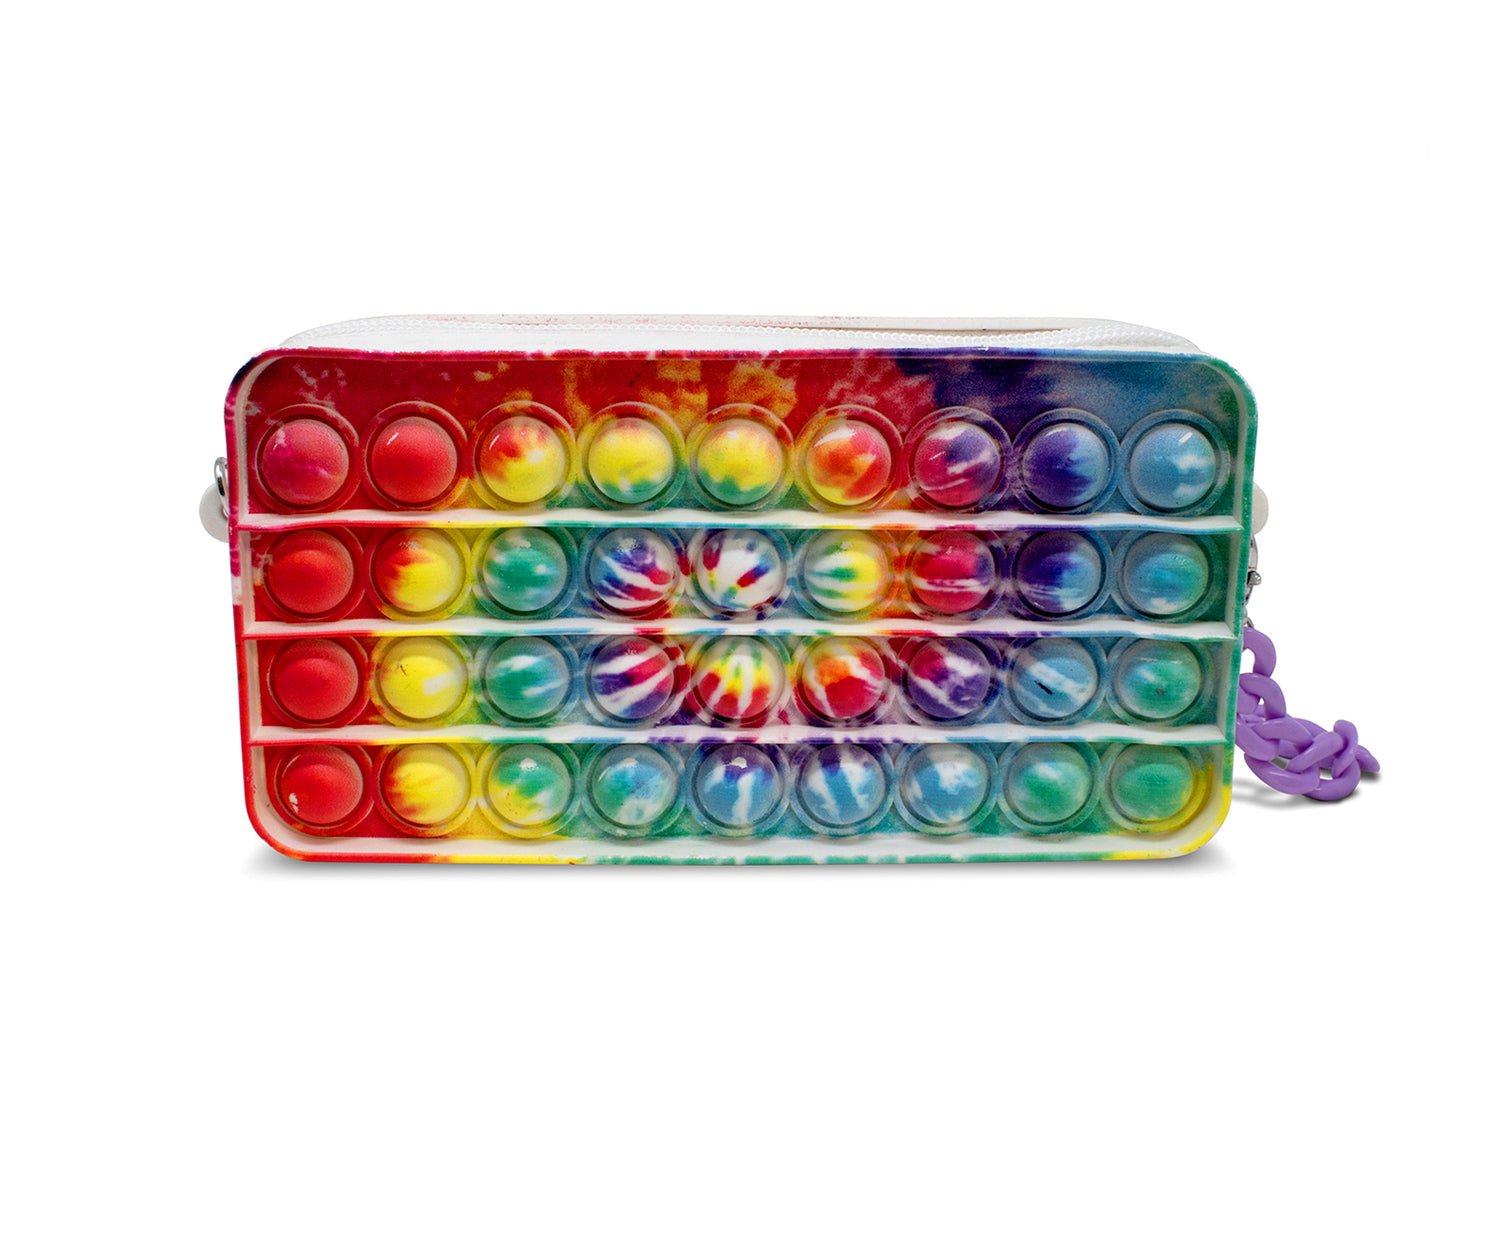 Bubble Pop Rectangular Purses are a great sensory fidget toy as well as a purse you can take anywhere. Easy to carry, fun to pop. Relieve your anxiety by pressing these soft silicone bubbles, over and over if you like. 3 different colorful pattern designs, each with hard plastic chain link strap.  Made of high-quality silicone material, with a Safe Zipper. Suitable for kids and adults, and helpful for those with ADHD, autism or anxiety issues. A great bubble pop mini fidget toy!